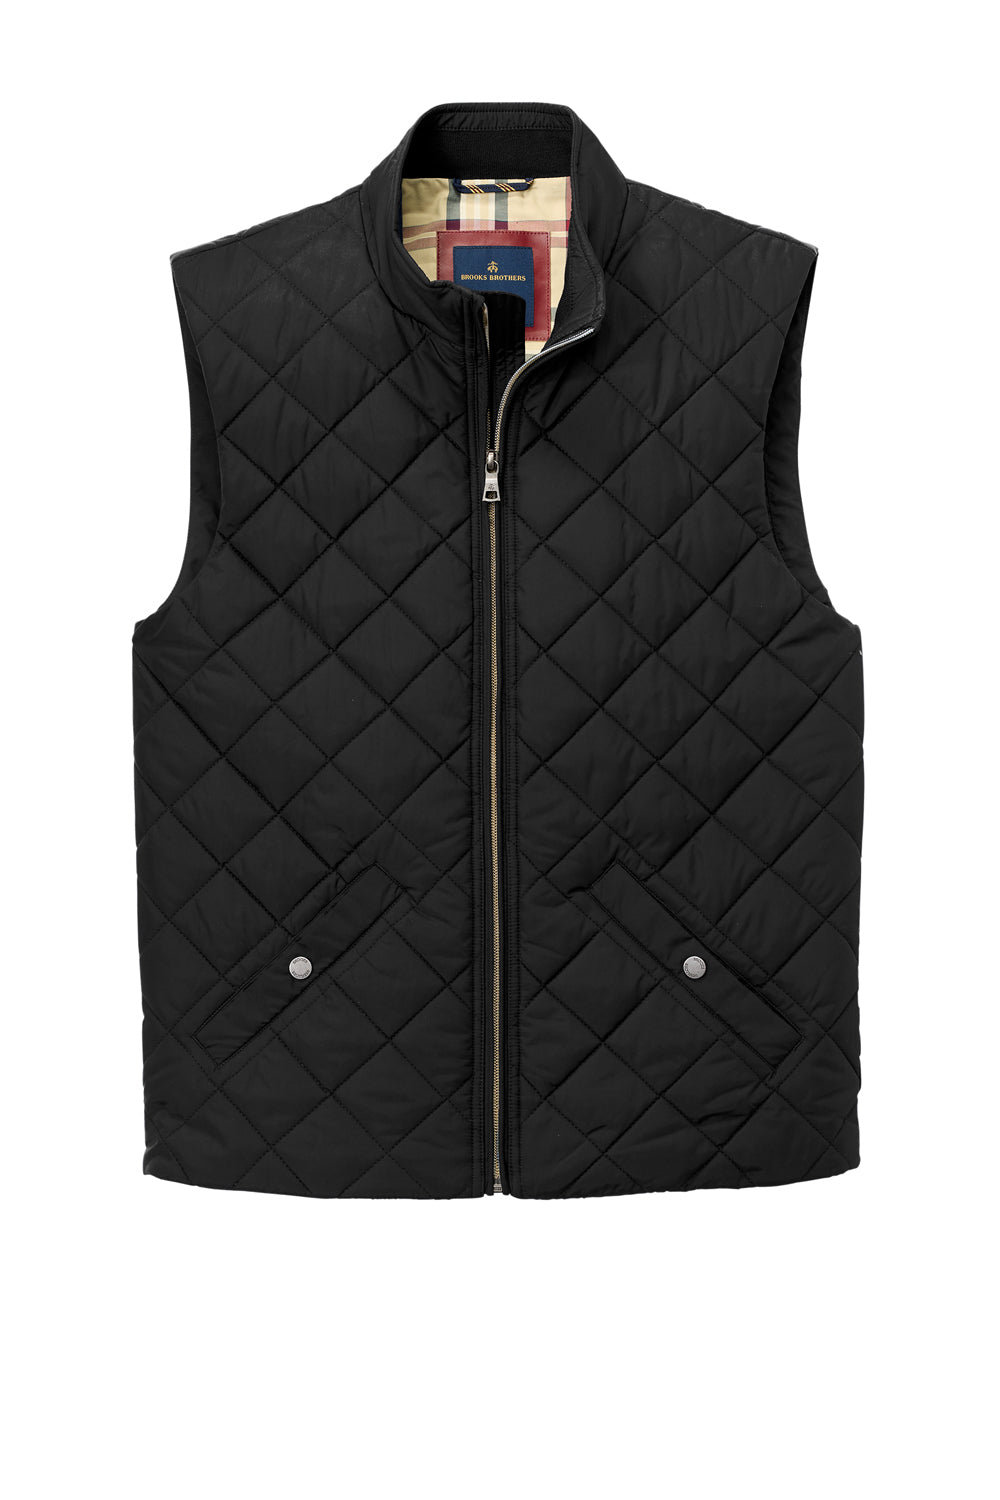 Brooks Brothers Mens Water Resistant Quilted Full Zip Vest Deep Black Flat Front